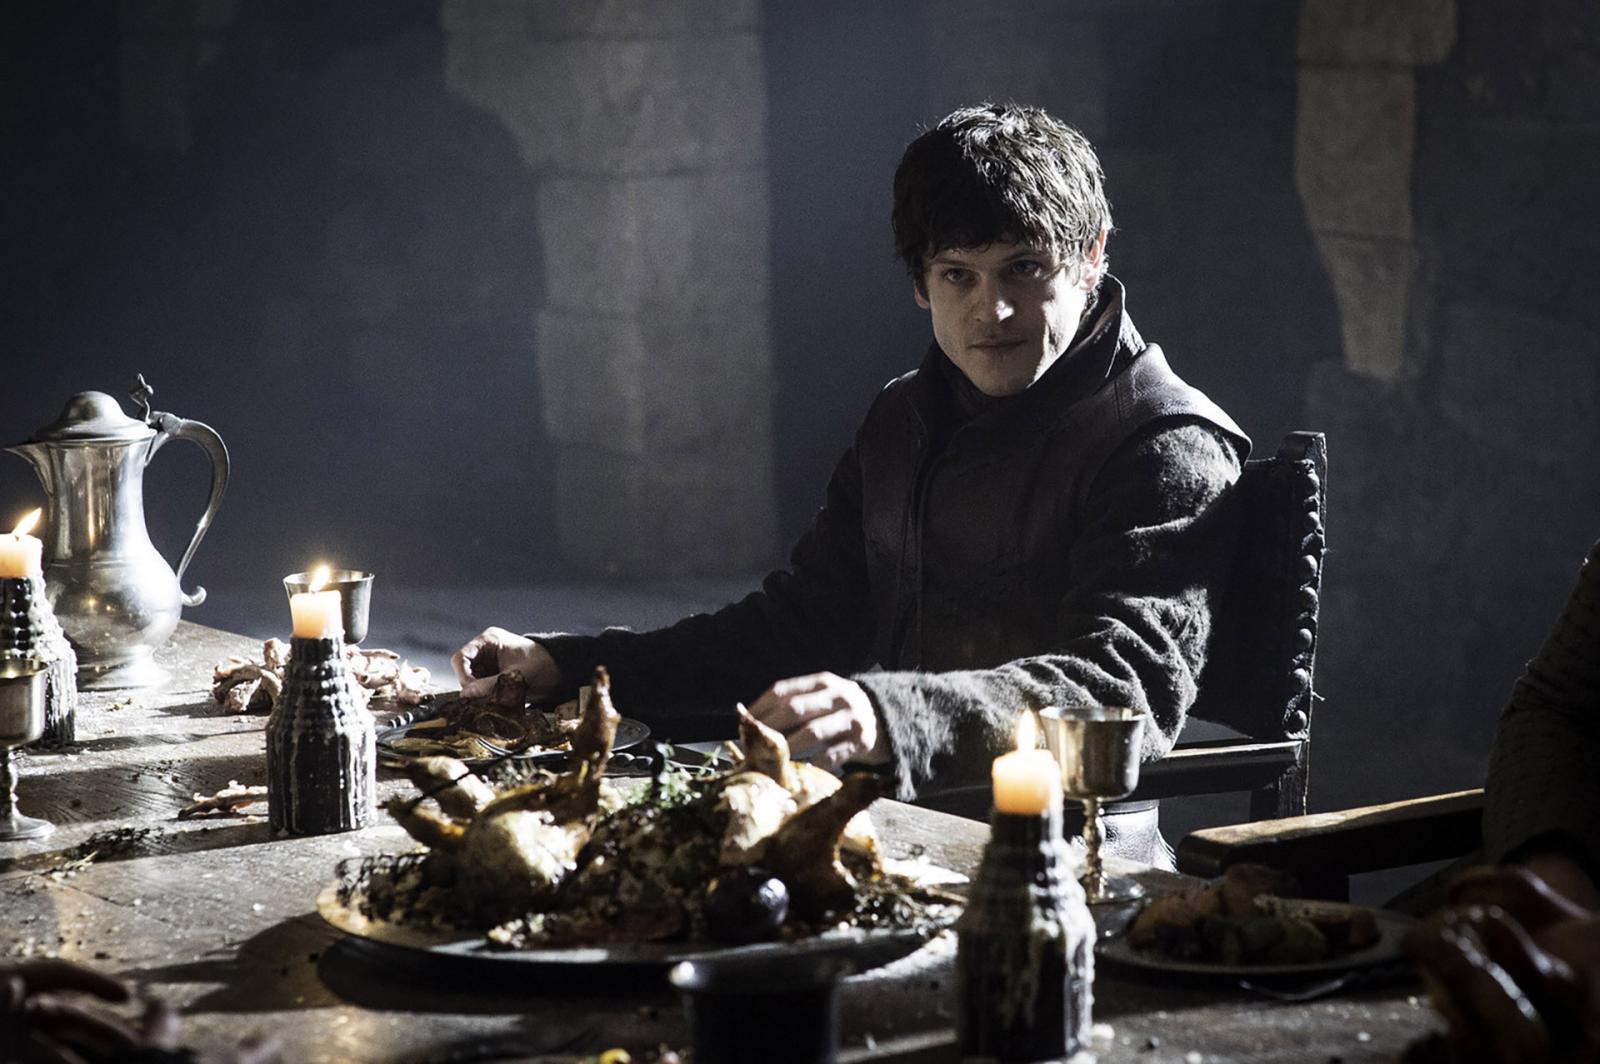 5 Most Evil Game of Thrones Characters, Ranked from Worst to… Even Worse - image 5